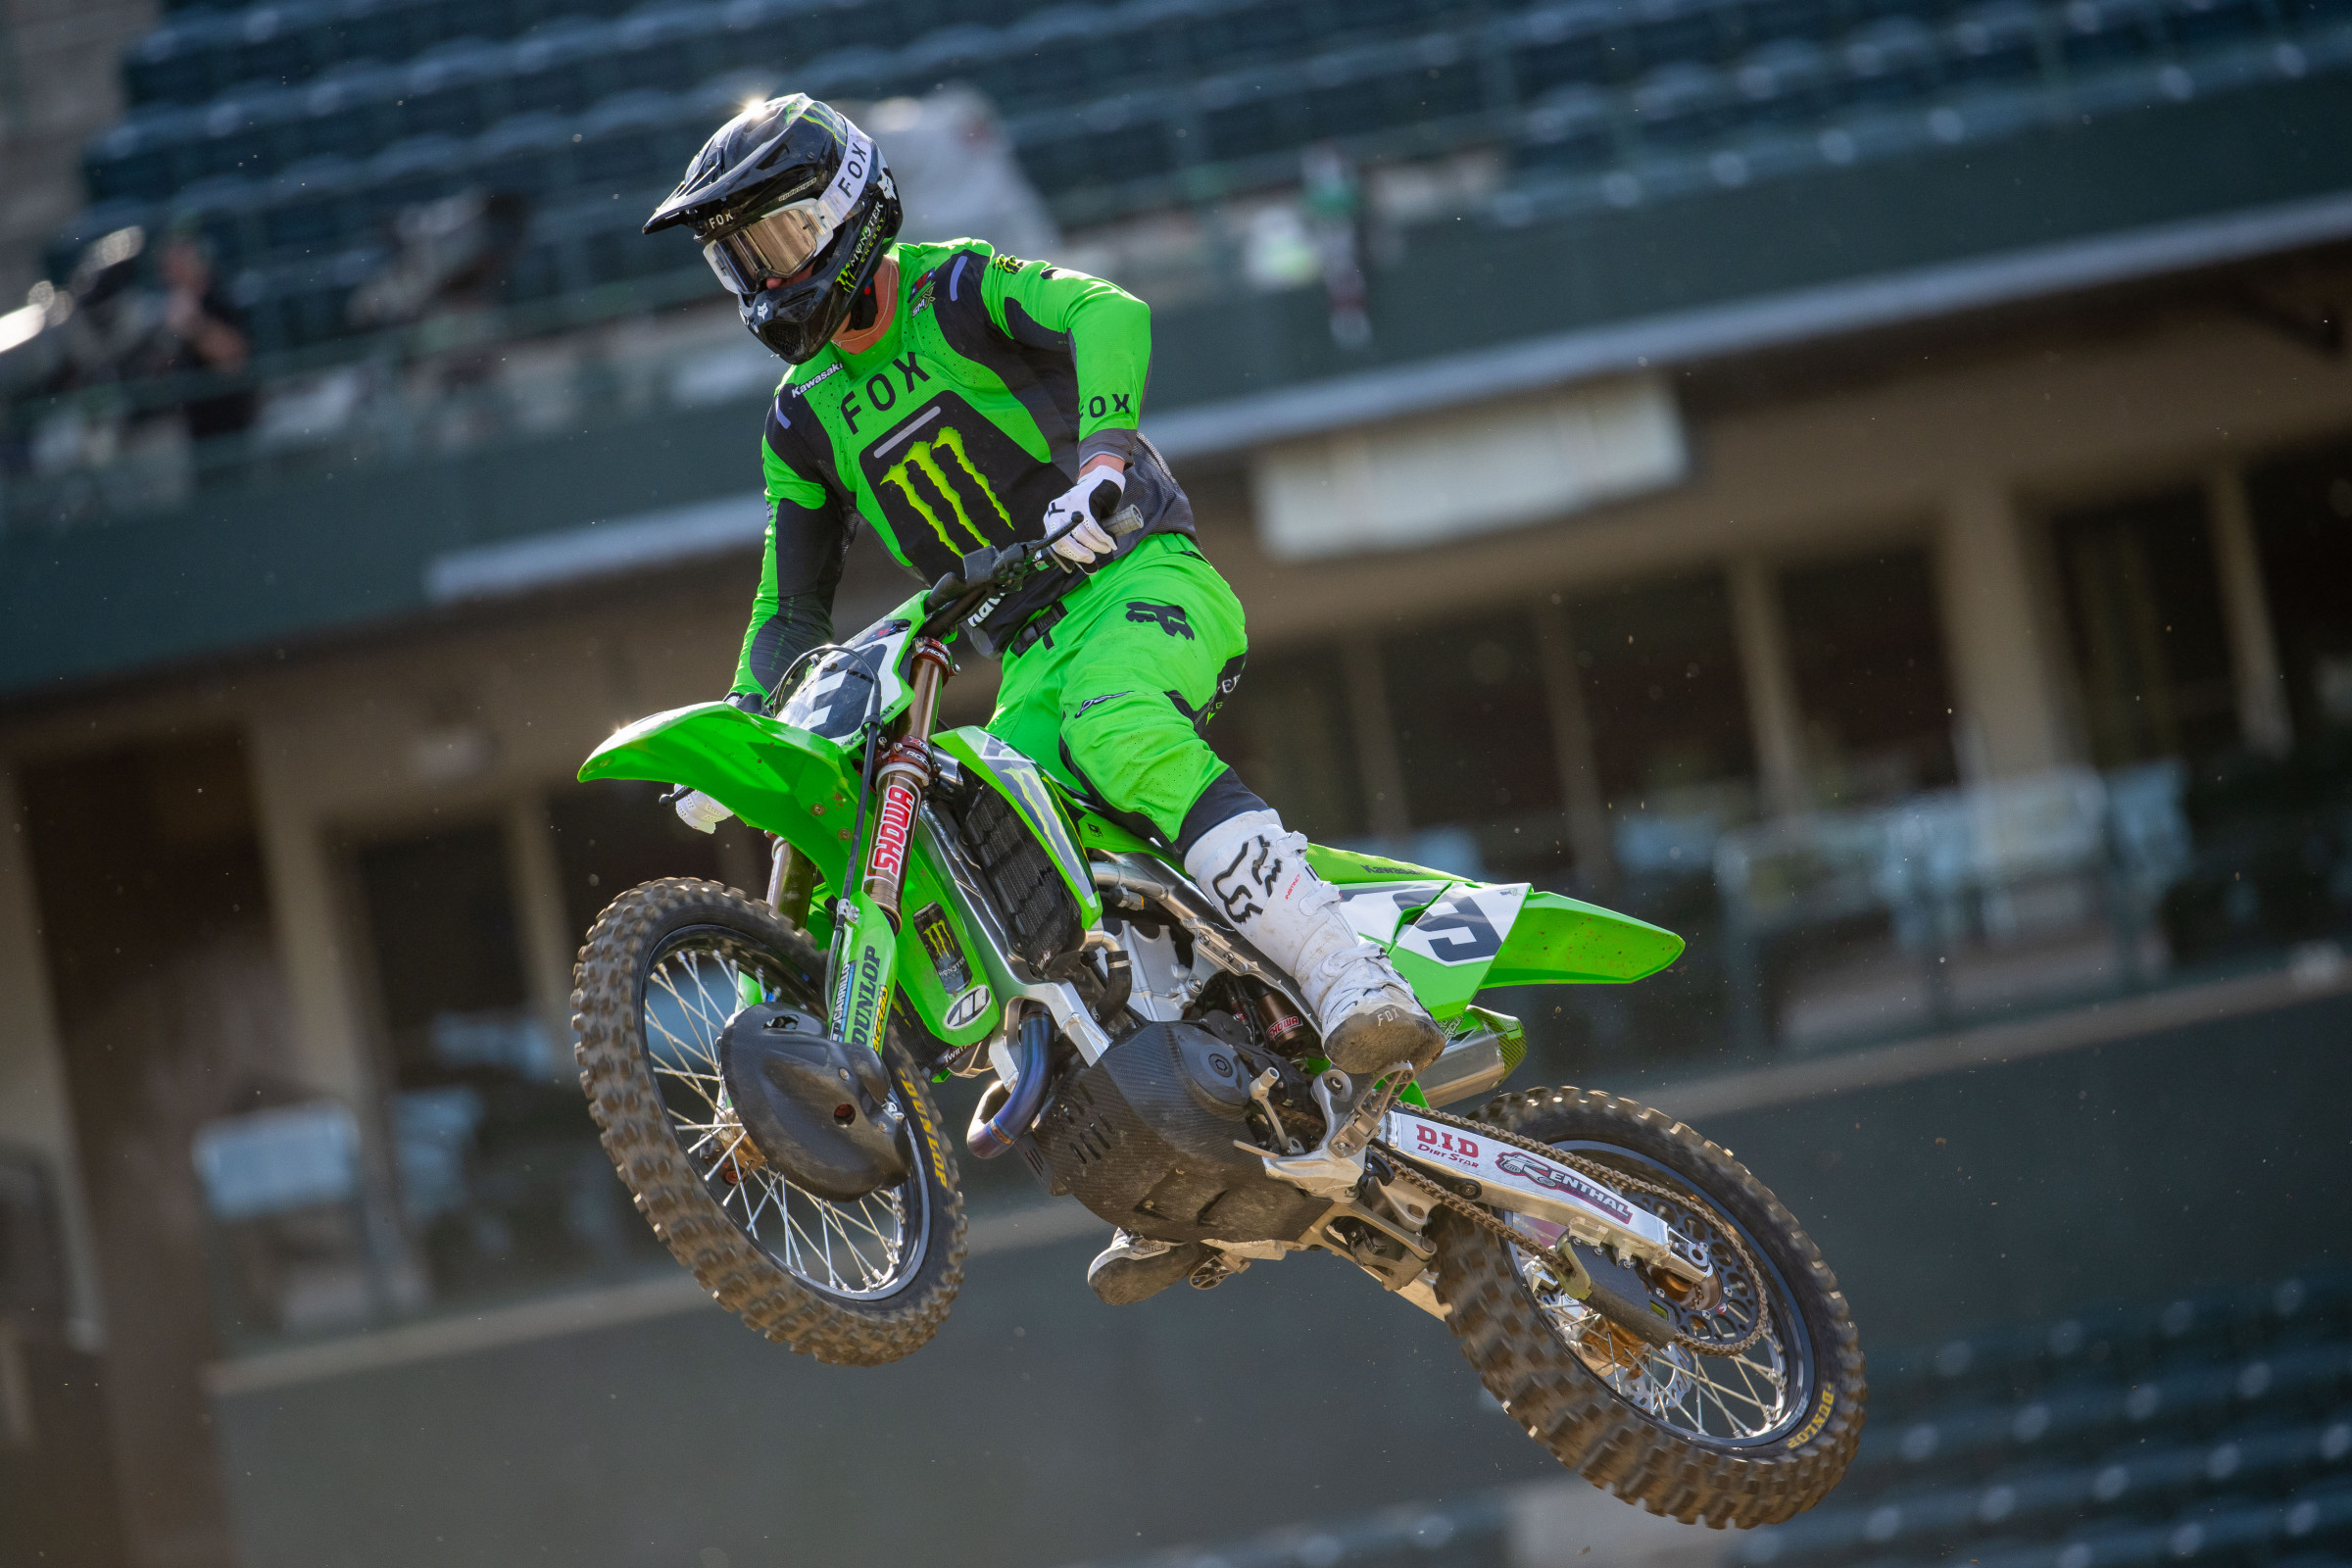 Adam Cianciarulo sidelined from Anaheim 2 Supercross due to Finger Injury